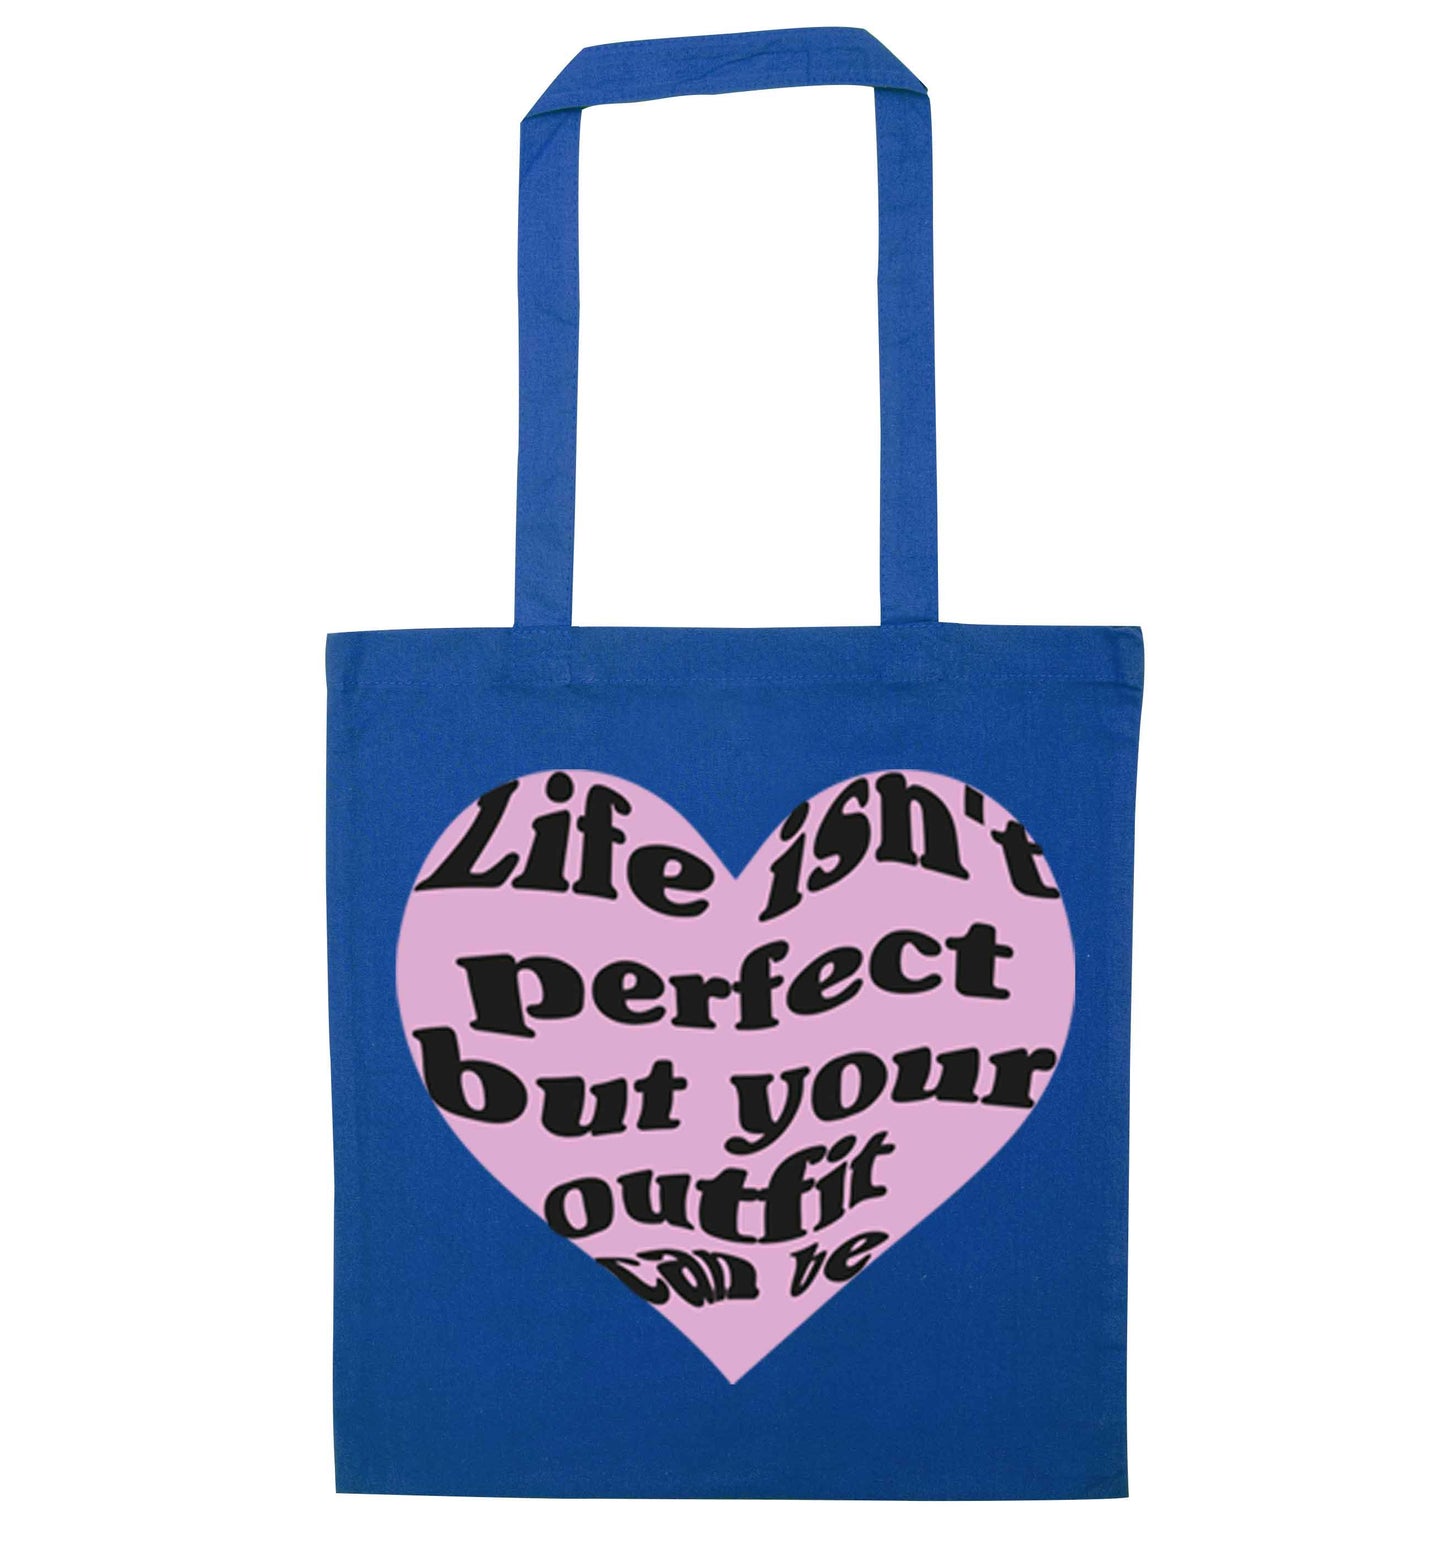 Life isn't perfect but your outfit can be blue tote bag